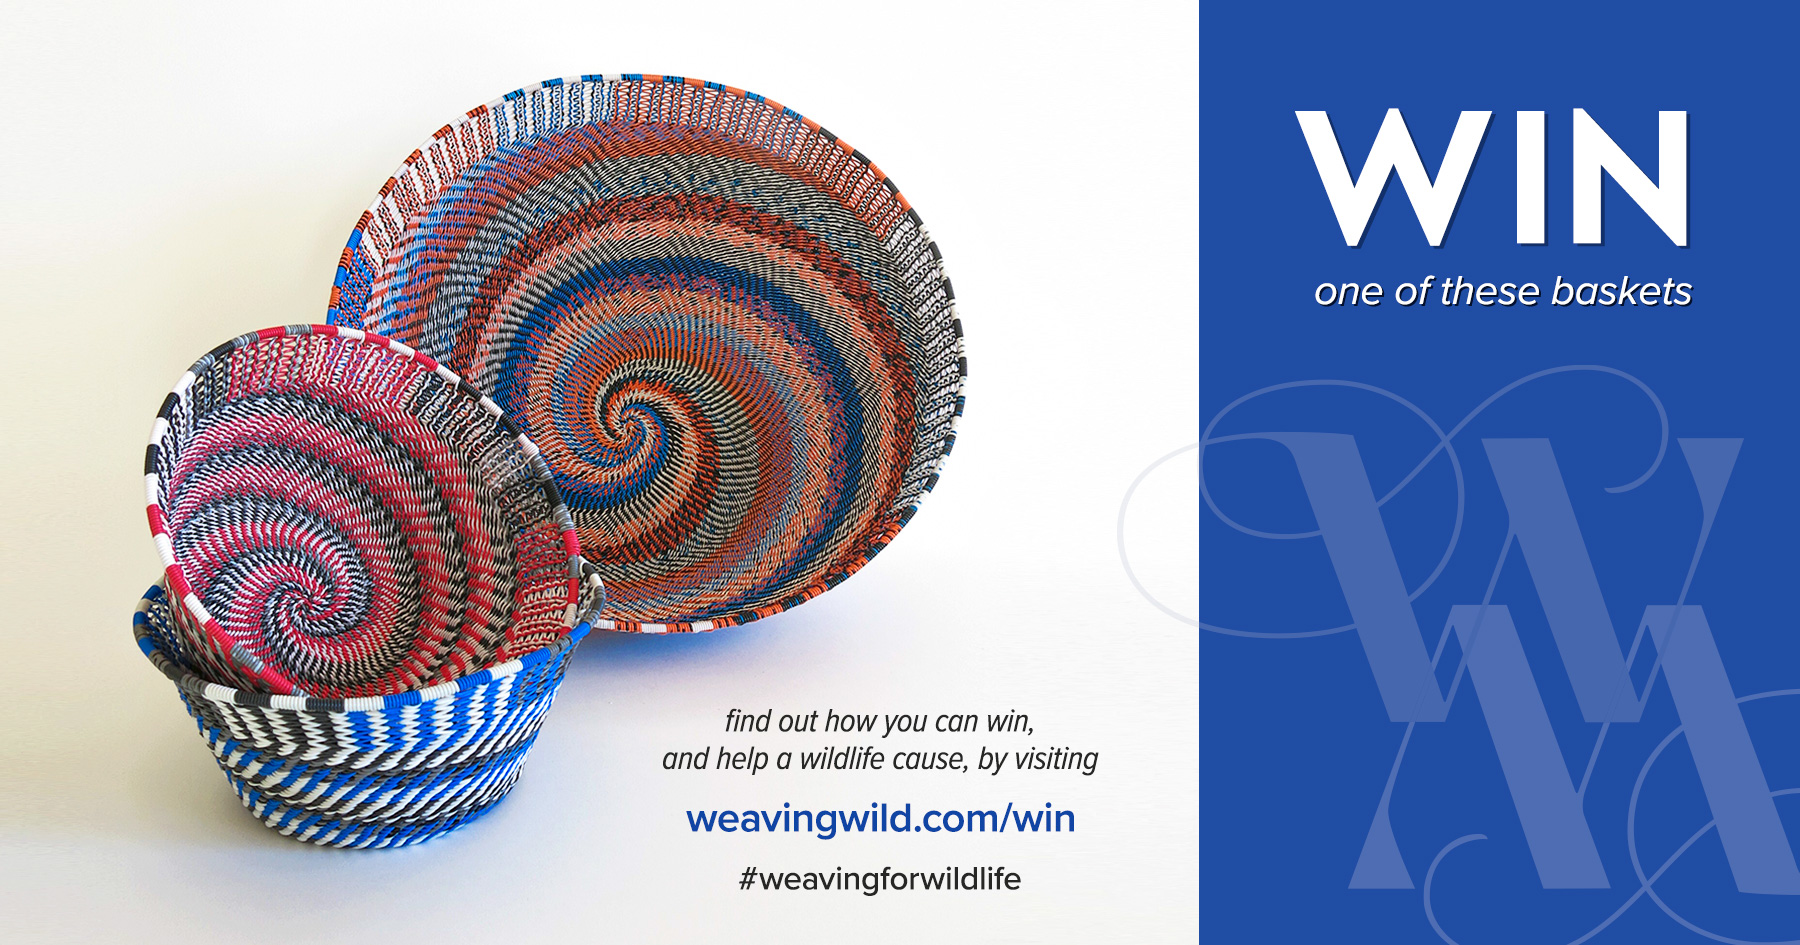 Win one of these baskets. Find out how you can win and help a wildlife cause.